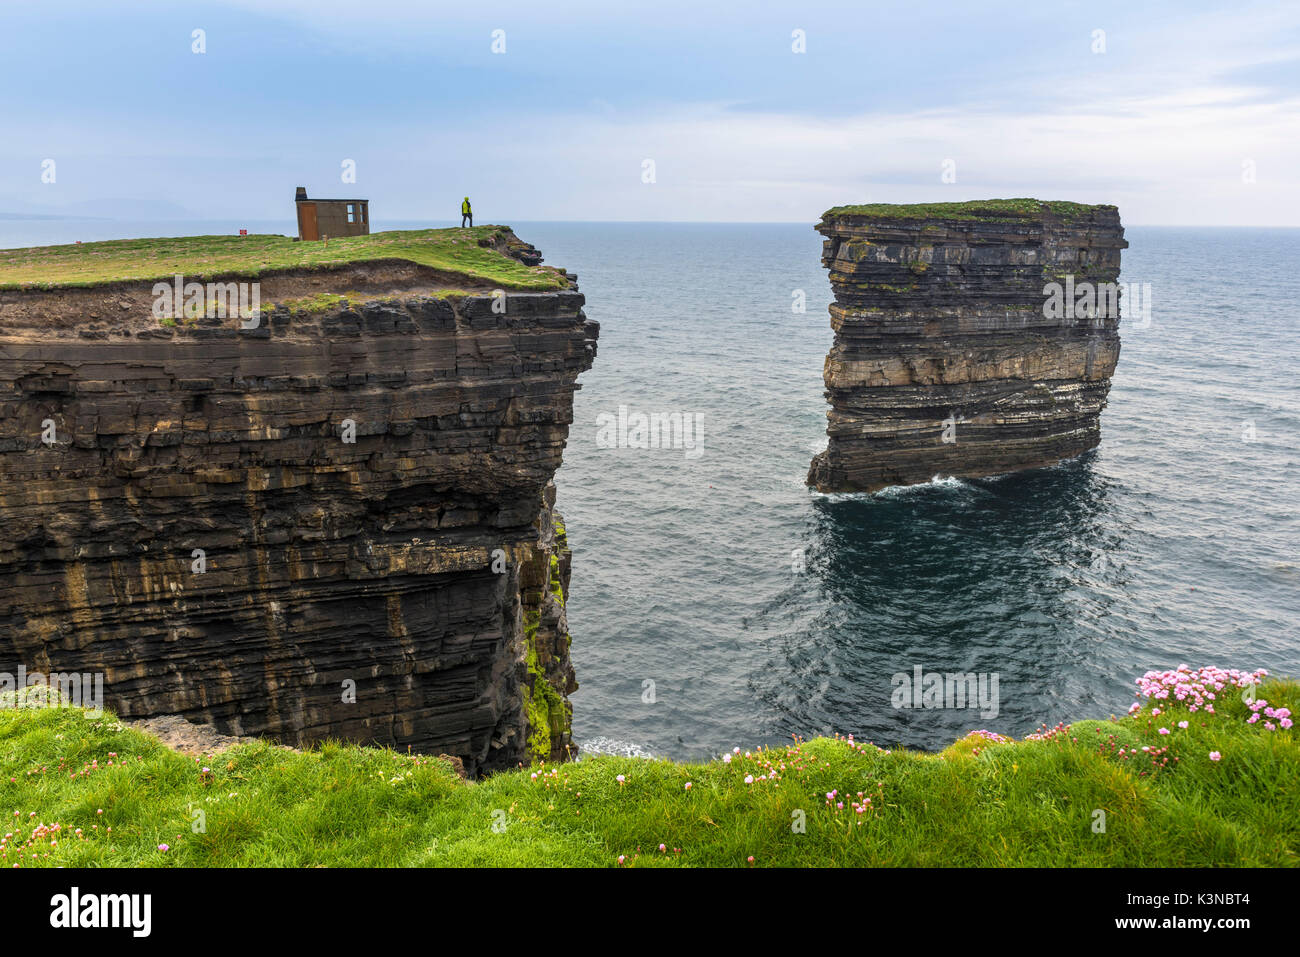 Downpatrick Head, Ballycastle, County Mayo, Donegal, Connacht region, Ireland, Europe. A man watching the sea stack from the top of the cliff. Stock Photo